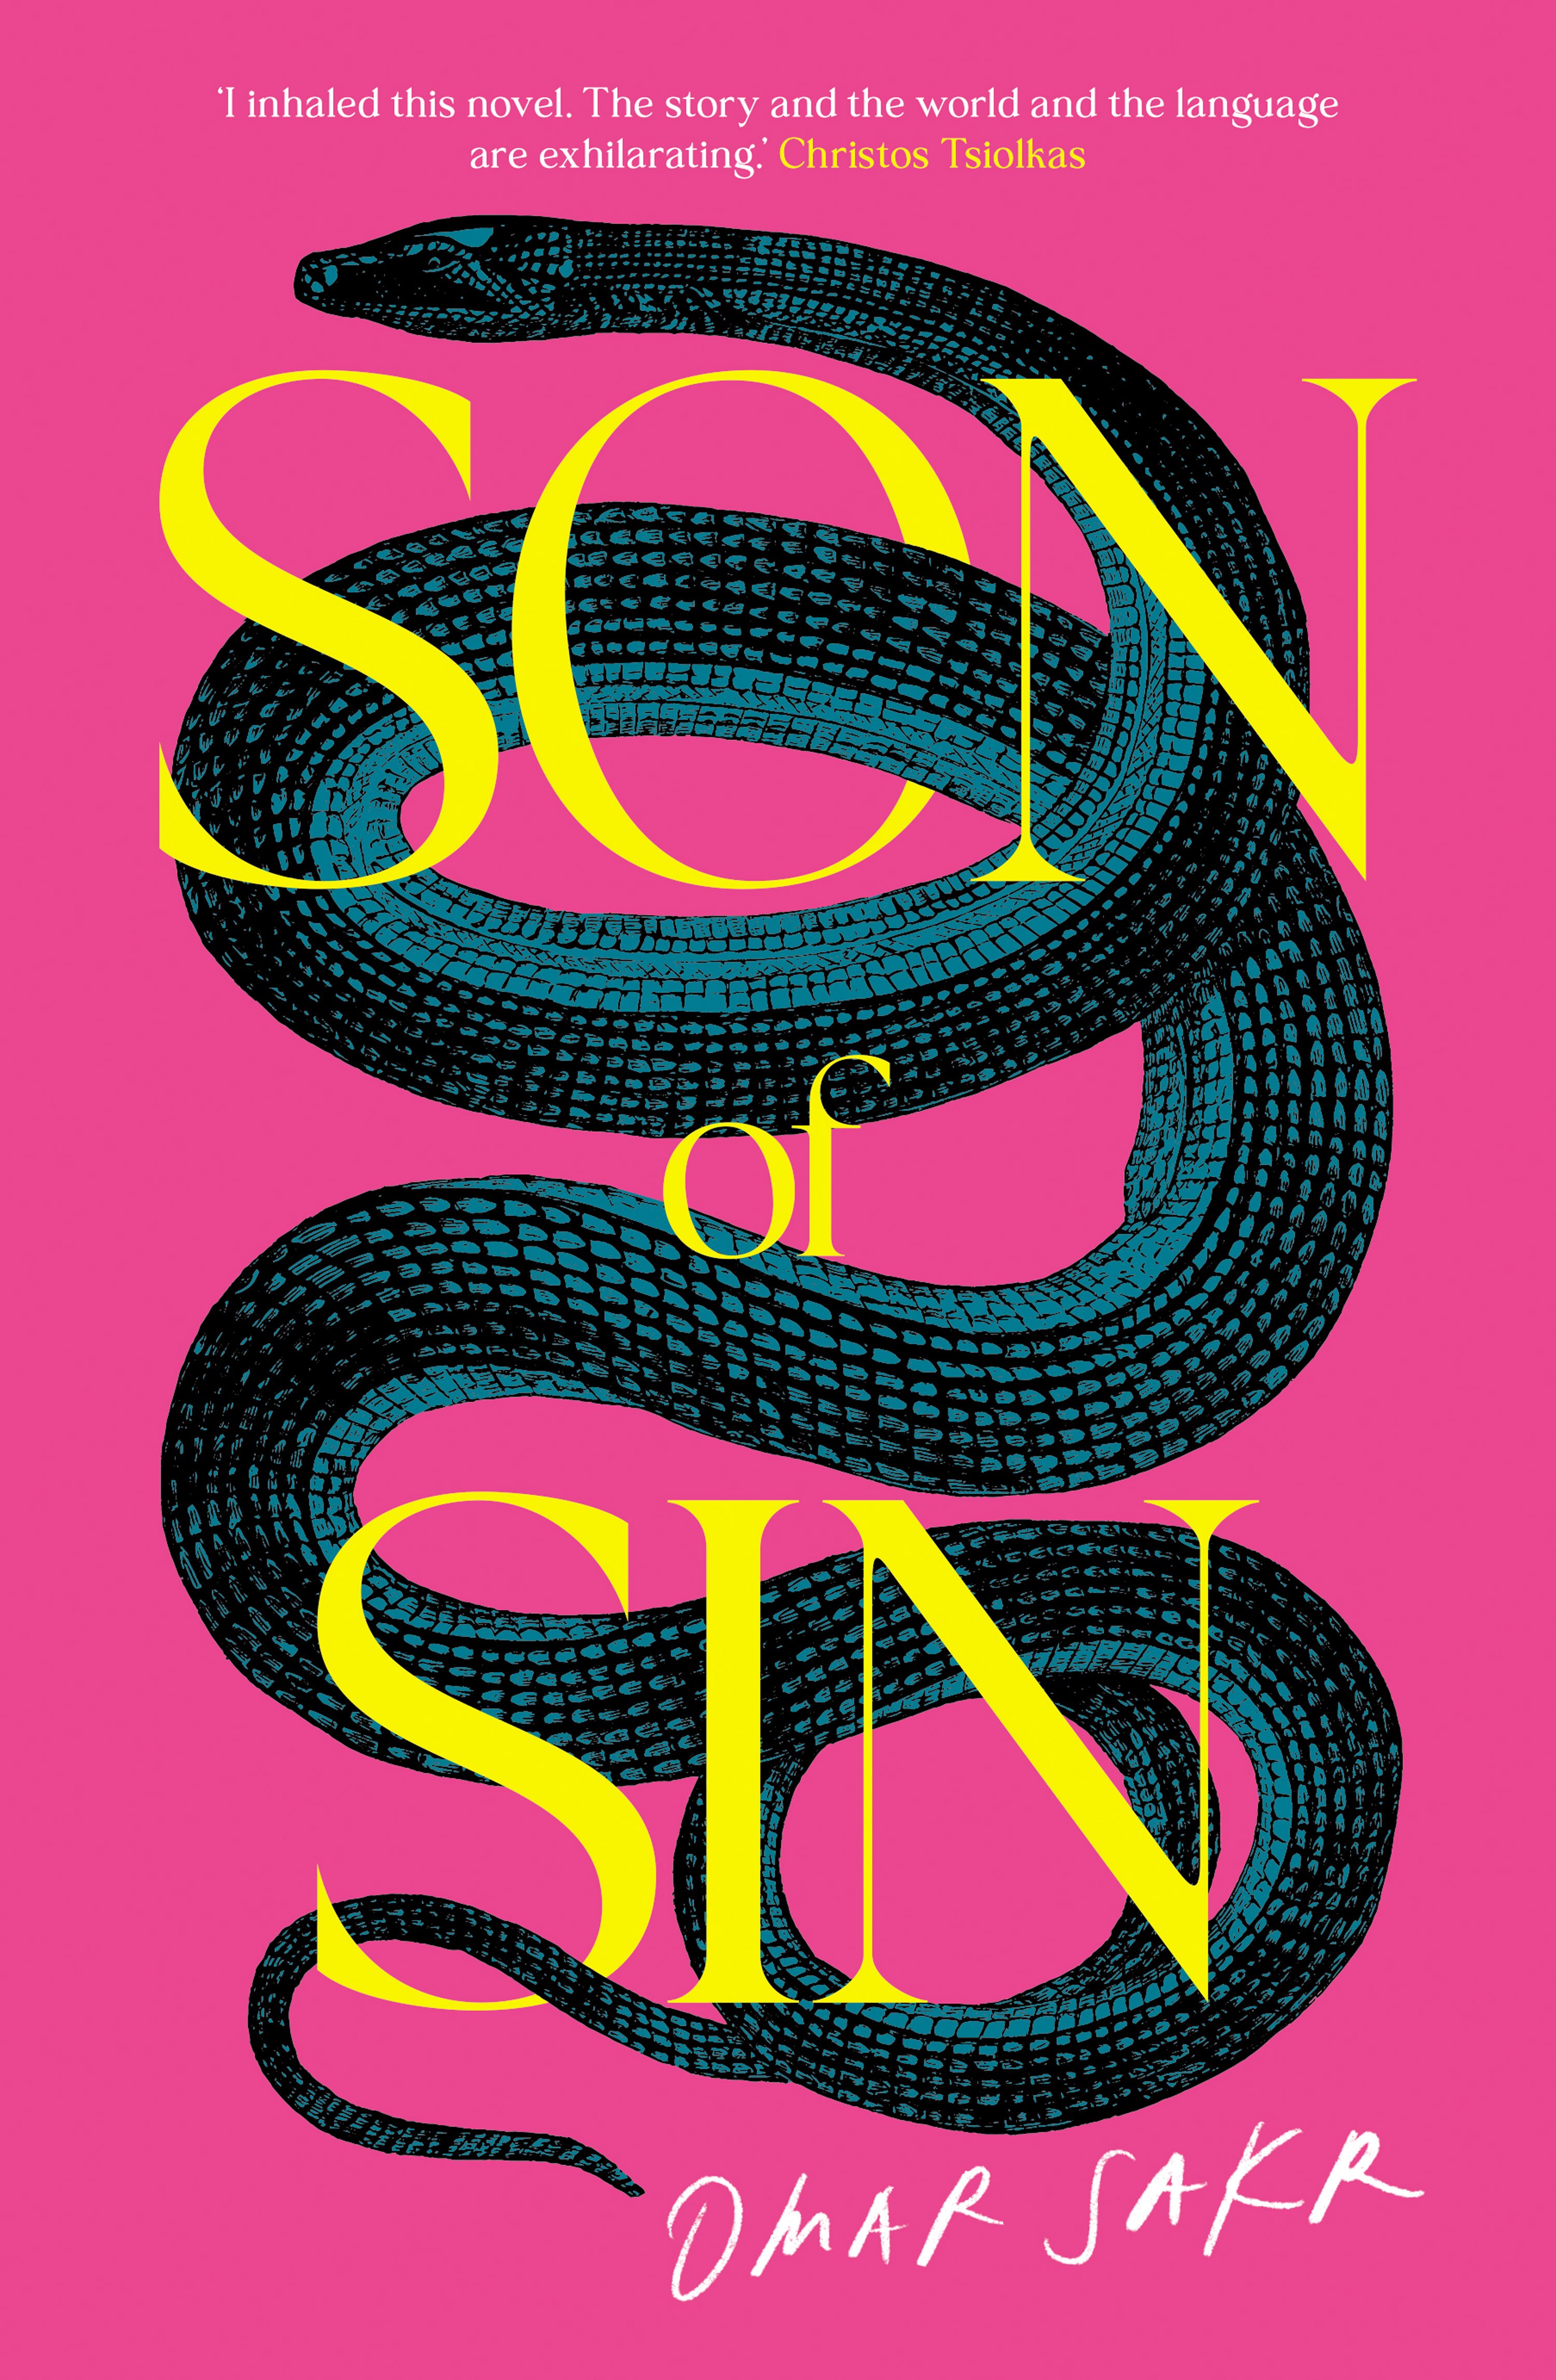 The book cover for Son of Sin: a black snake coils through the title of the text which appears in yellow against a hot pink base